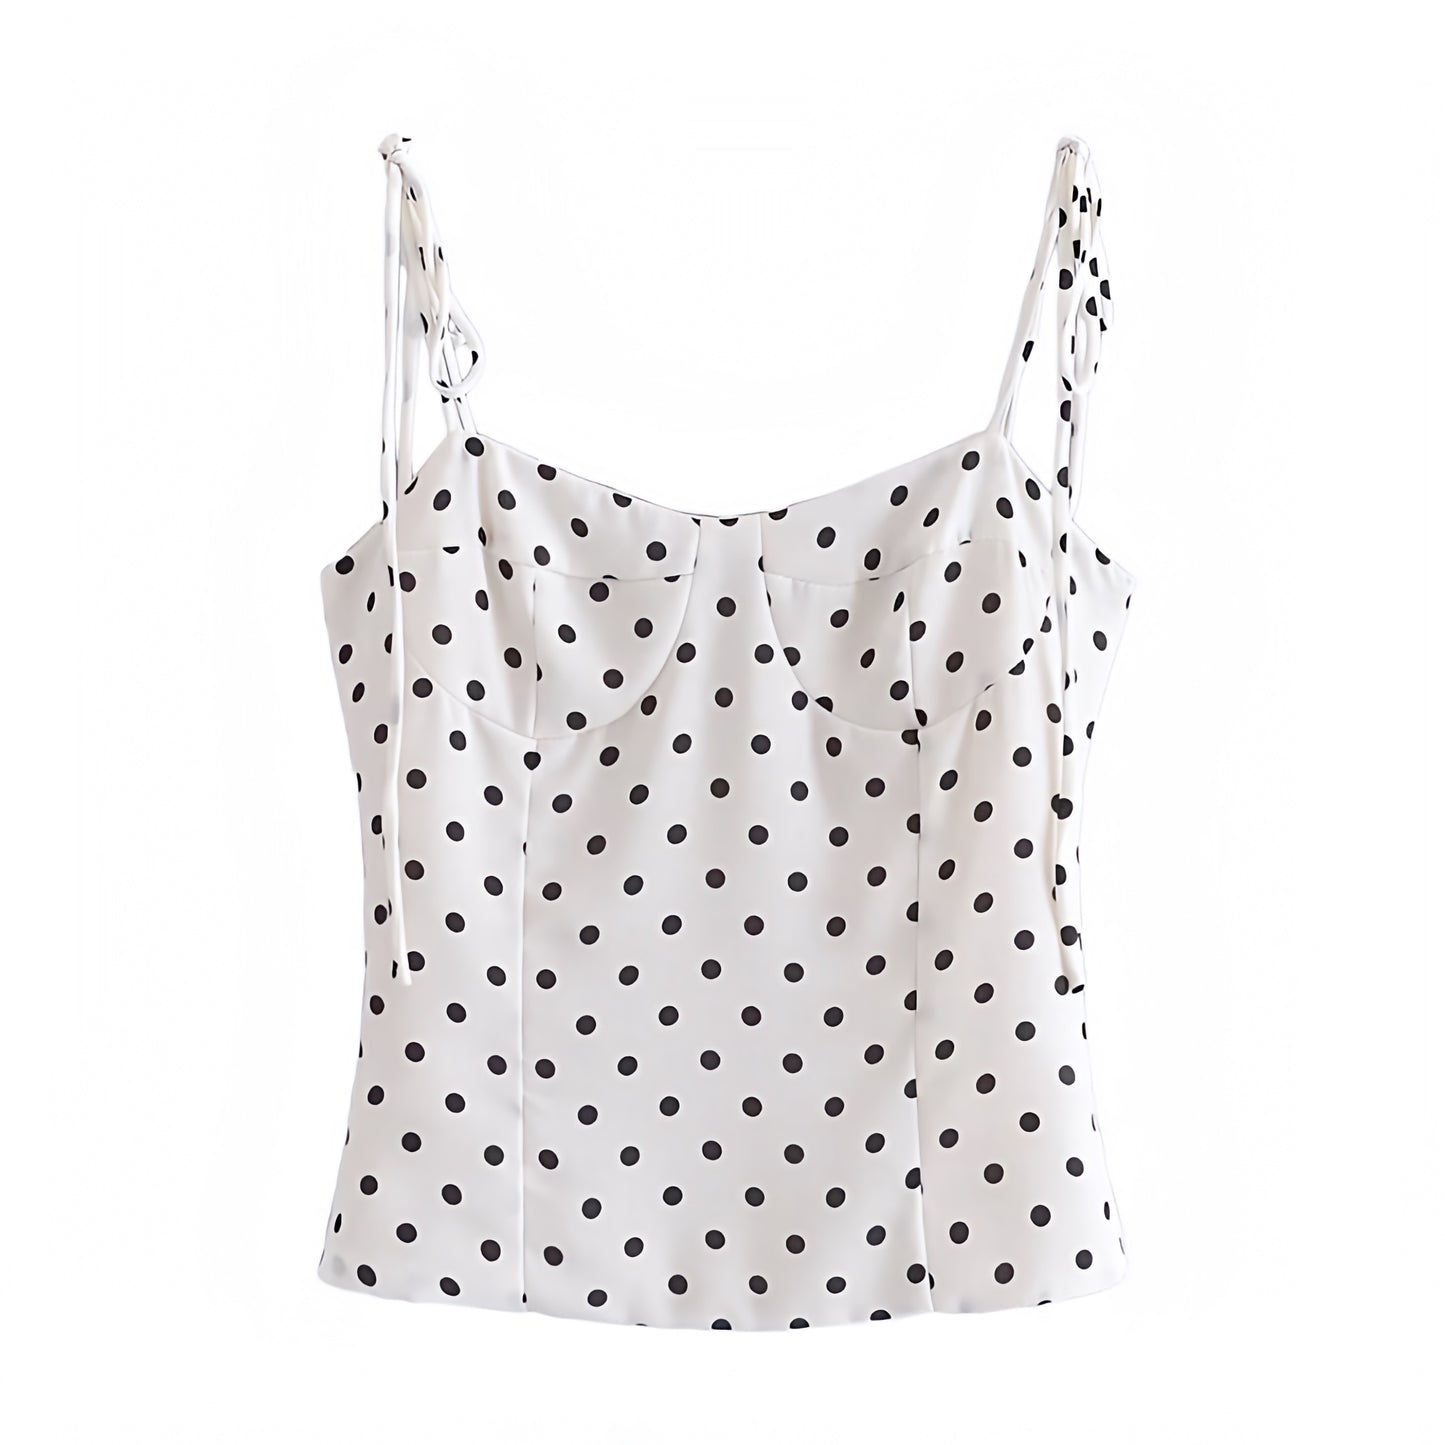 black-and-white-polka-dot-print-patterned-contrast-slim-fit-corset-bustier-bodycon-round-neck-spaghetti-strap-sleeveless-backless-open-back-camisole-crop-tank-top-blouse-spring-2024-summer-chic-trendy-women-ladies-elegant-casual-classy-feminine-semi-formal-preppy-style-european-beach-wear-zara-revolve-princess-polly-altard-state-edikted-urban-outfitters-brandy-melville